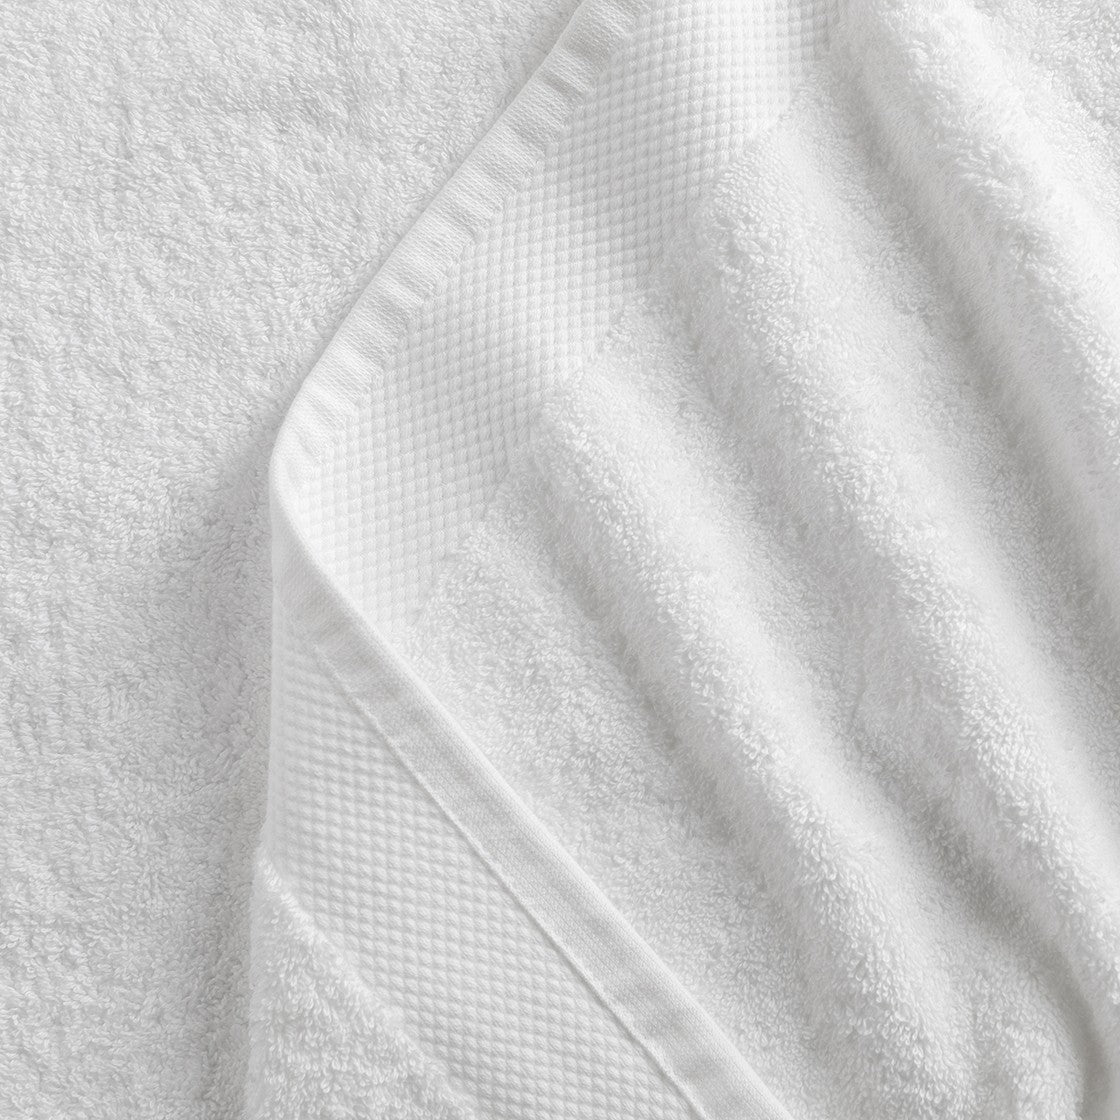 Bella Cosa White Hotel Towels from Sobel Westex Official